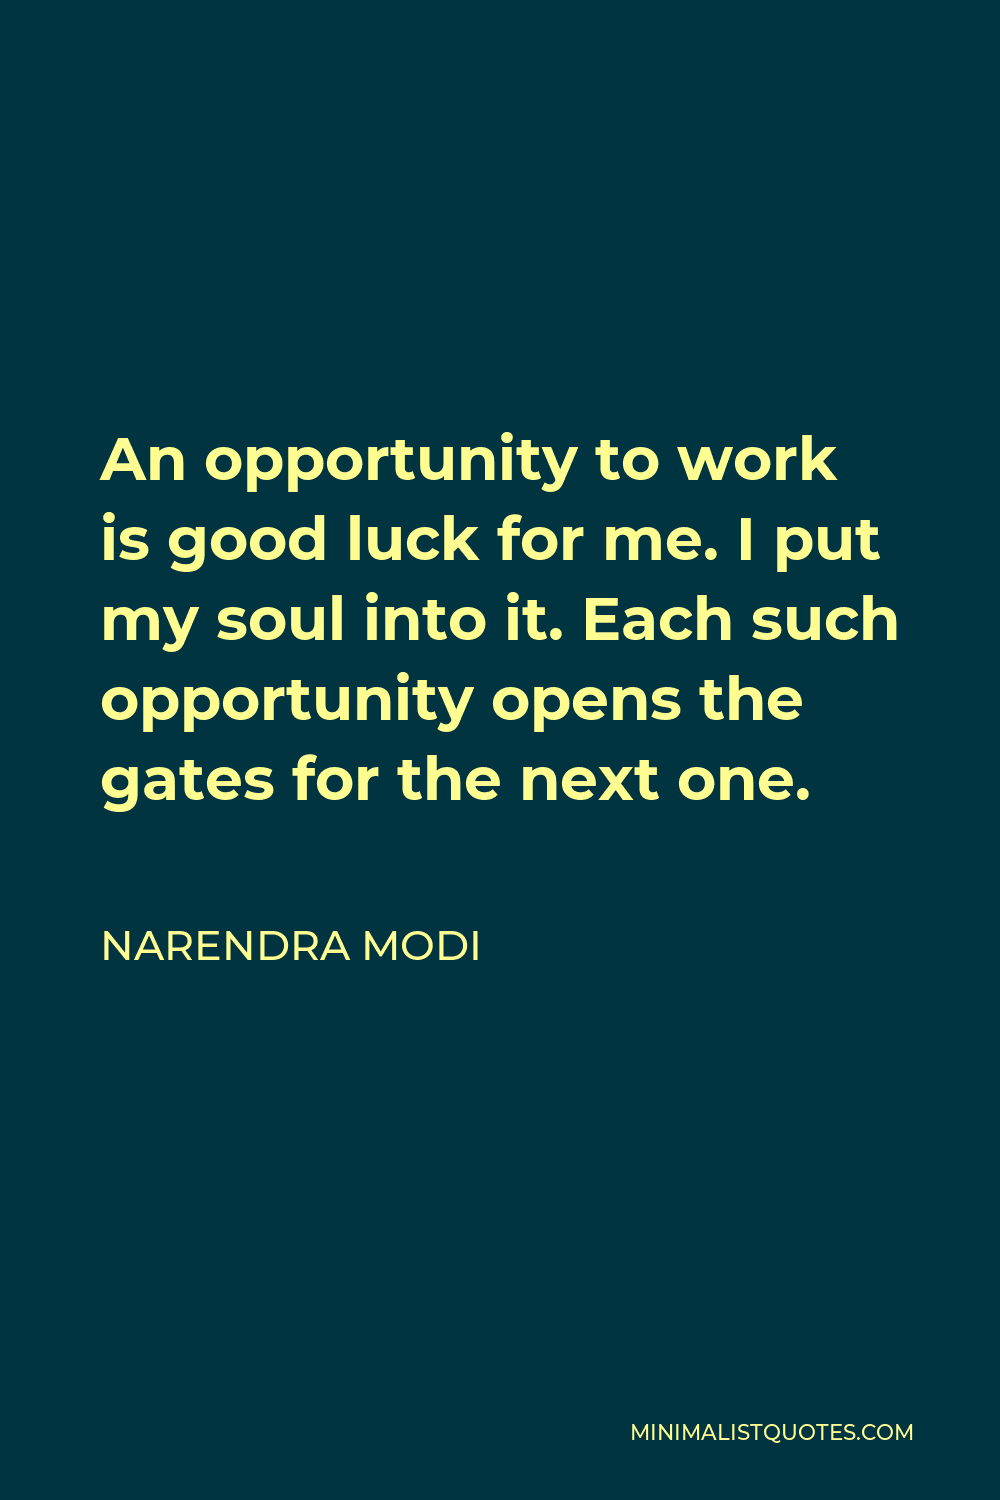 Narendra Modi Quote - An opportunity to work is good luck for me. I put my soul into it. Each such opportunity opens the gates for the next one.